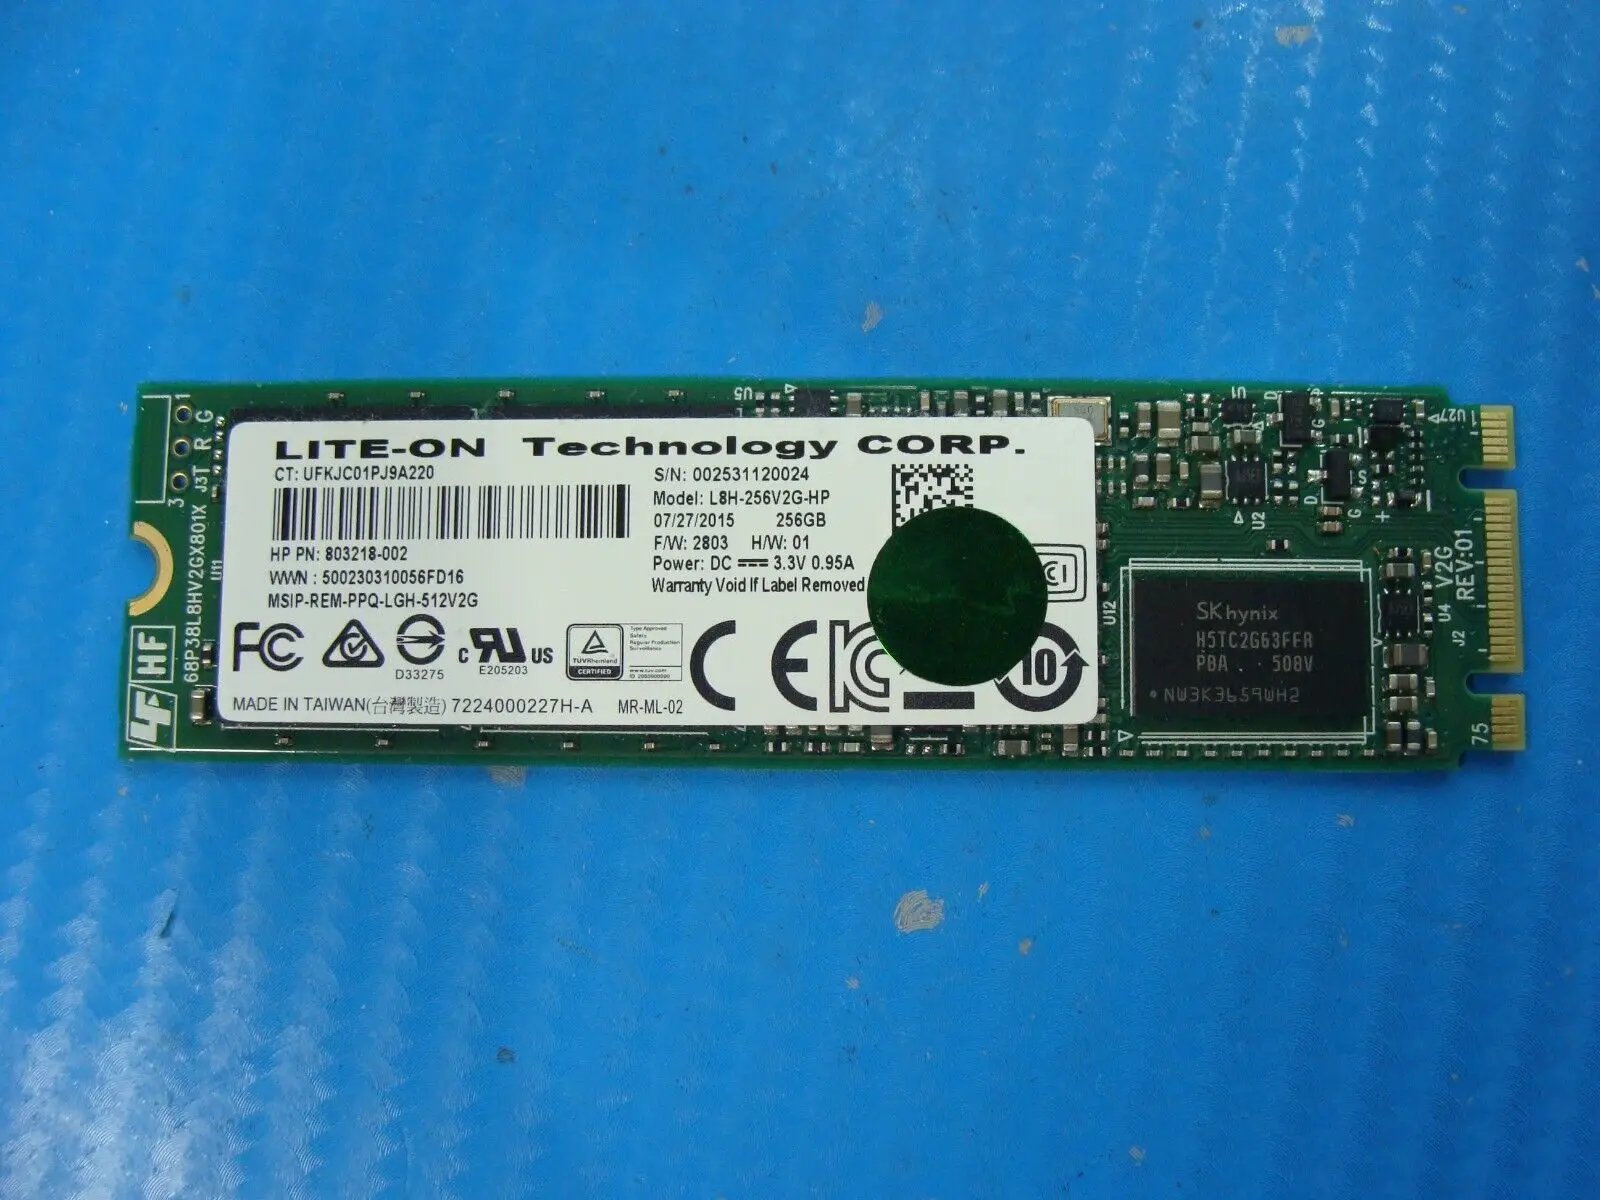 HP 13-4103dx Lite-On 256GB SATA M.2 SSD Solid State Drive L8H-256V2G-HP